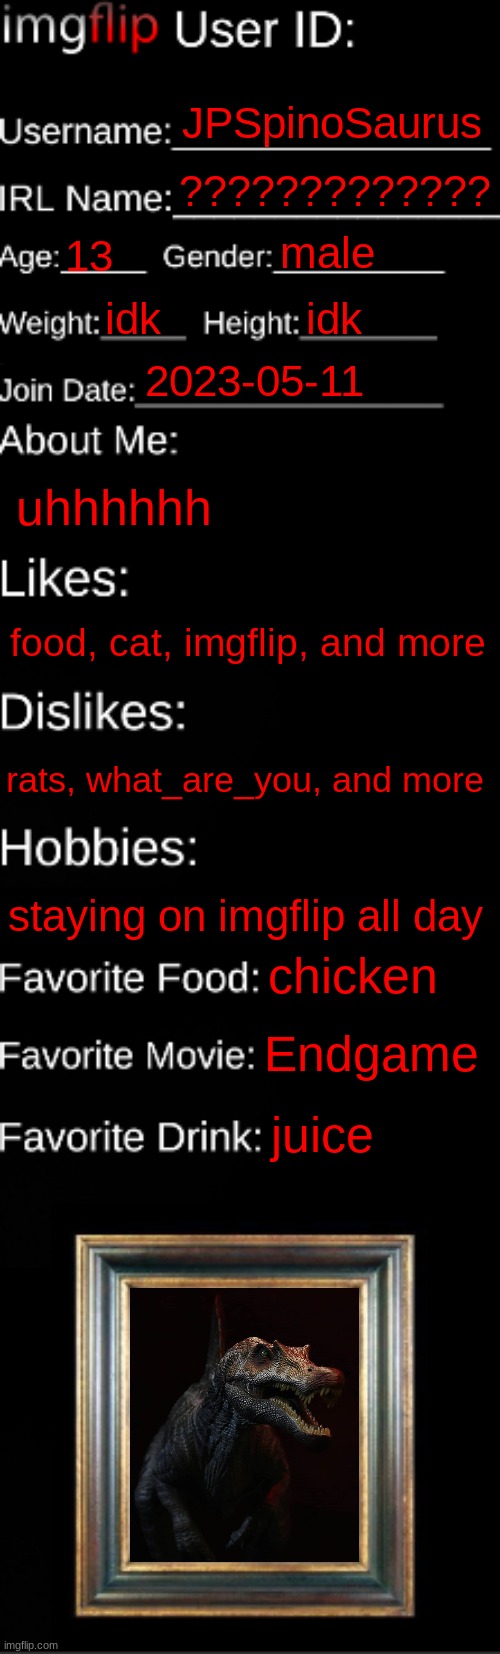 imgflip ID Card | JPSpinoSaurus; ????????????? male; 13; idk; idk; 2023-05-11; uhhhhhh; food, cat, imgflip, and more; rats, what_are_you, and more; staying on imgflip all day; chicken; Endgame; juice | image tagged in imgflip id card | made w/ Imgflip meme maker